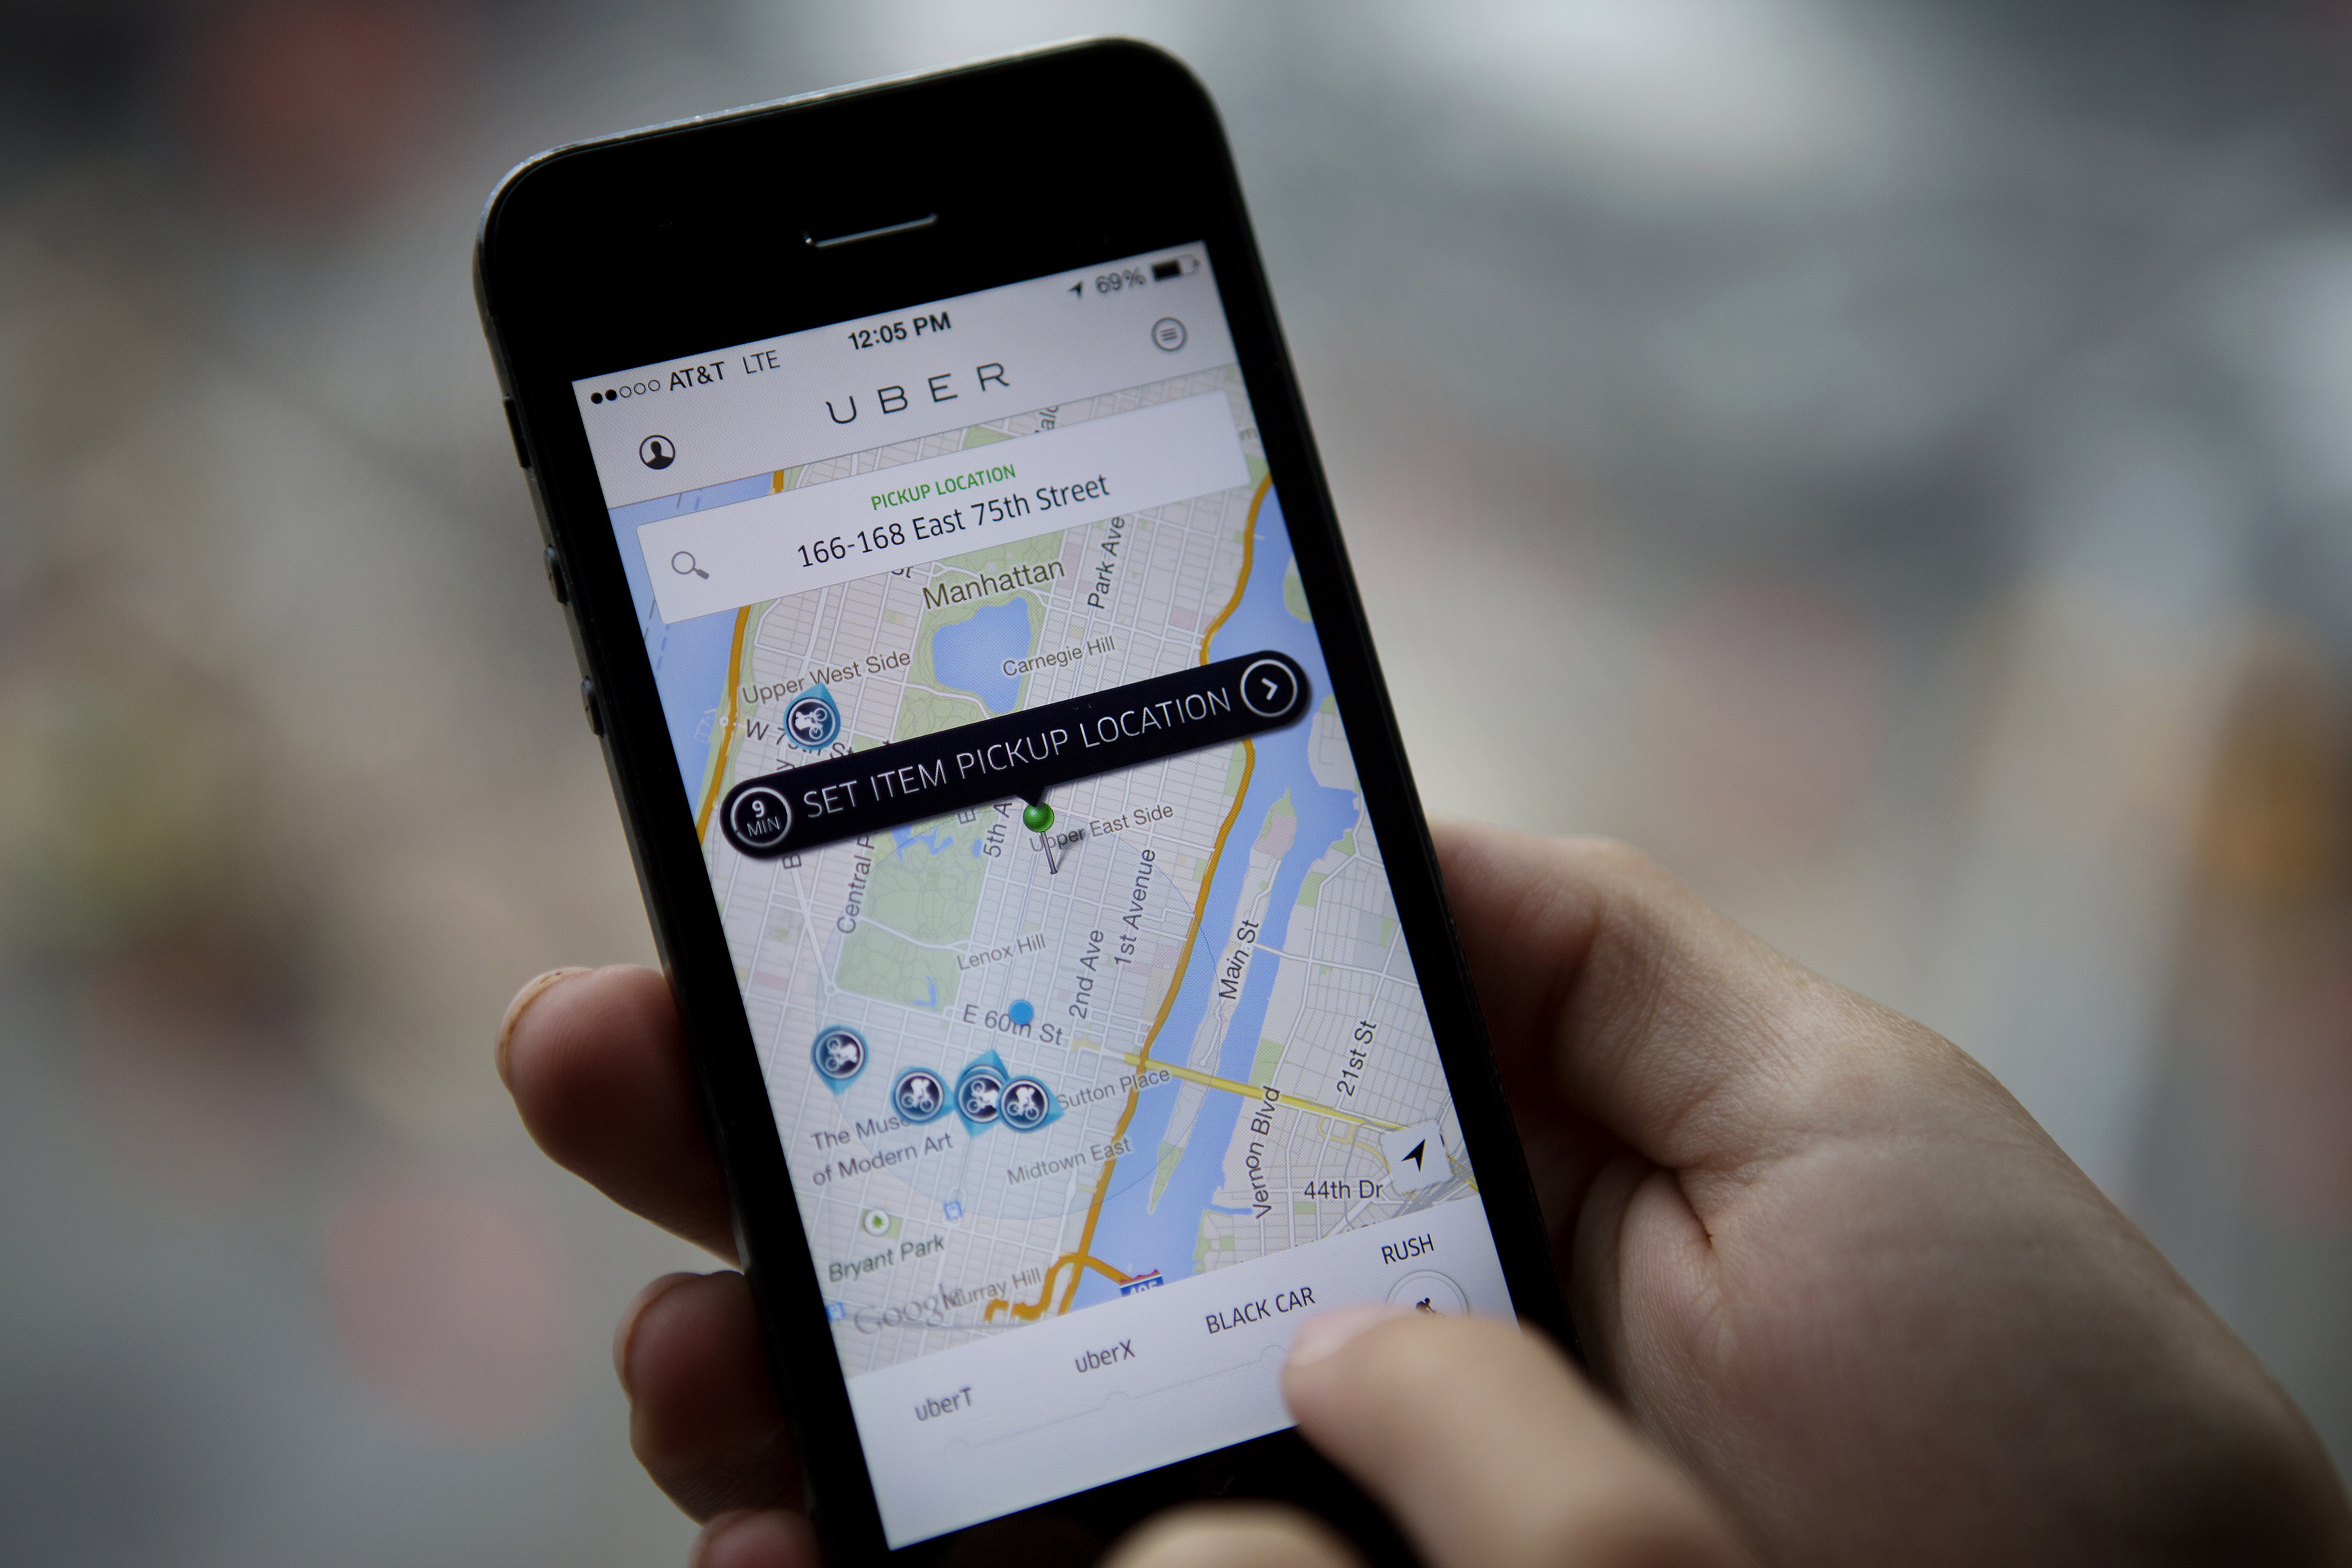 Th Uber Technologies Inc. car service application (app) is demonstrated for a photograph on an Apple Inc. iPhone in New York, U.S., on Wednesday, Aug. 6, 2014. For San Francisco-based Uber Technologies Inc. which recently raised $1.2 billion of investors' financing at $17 billion valuation, New York is its biggest by revenue among the 150 cities in which it operates across 42 countries. The Hamptons are a pop-up market for high-end season weekends where the average trip is three time that of an average trip in New York City. (Bloomberg—Bloomberg via Getty Images)